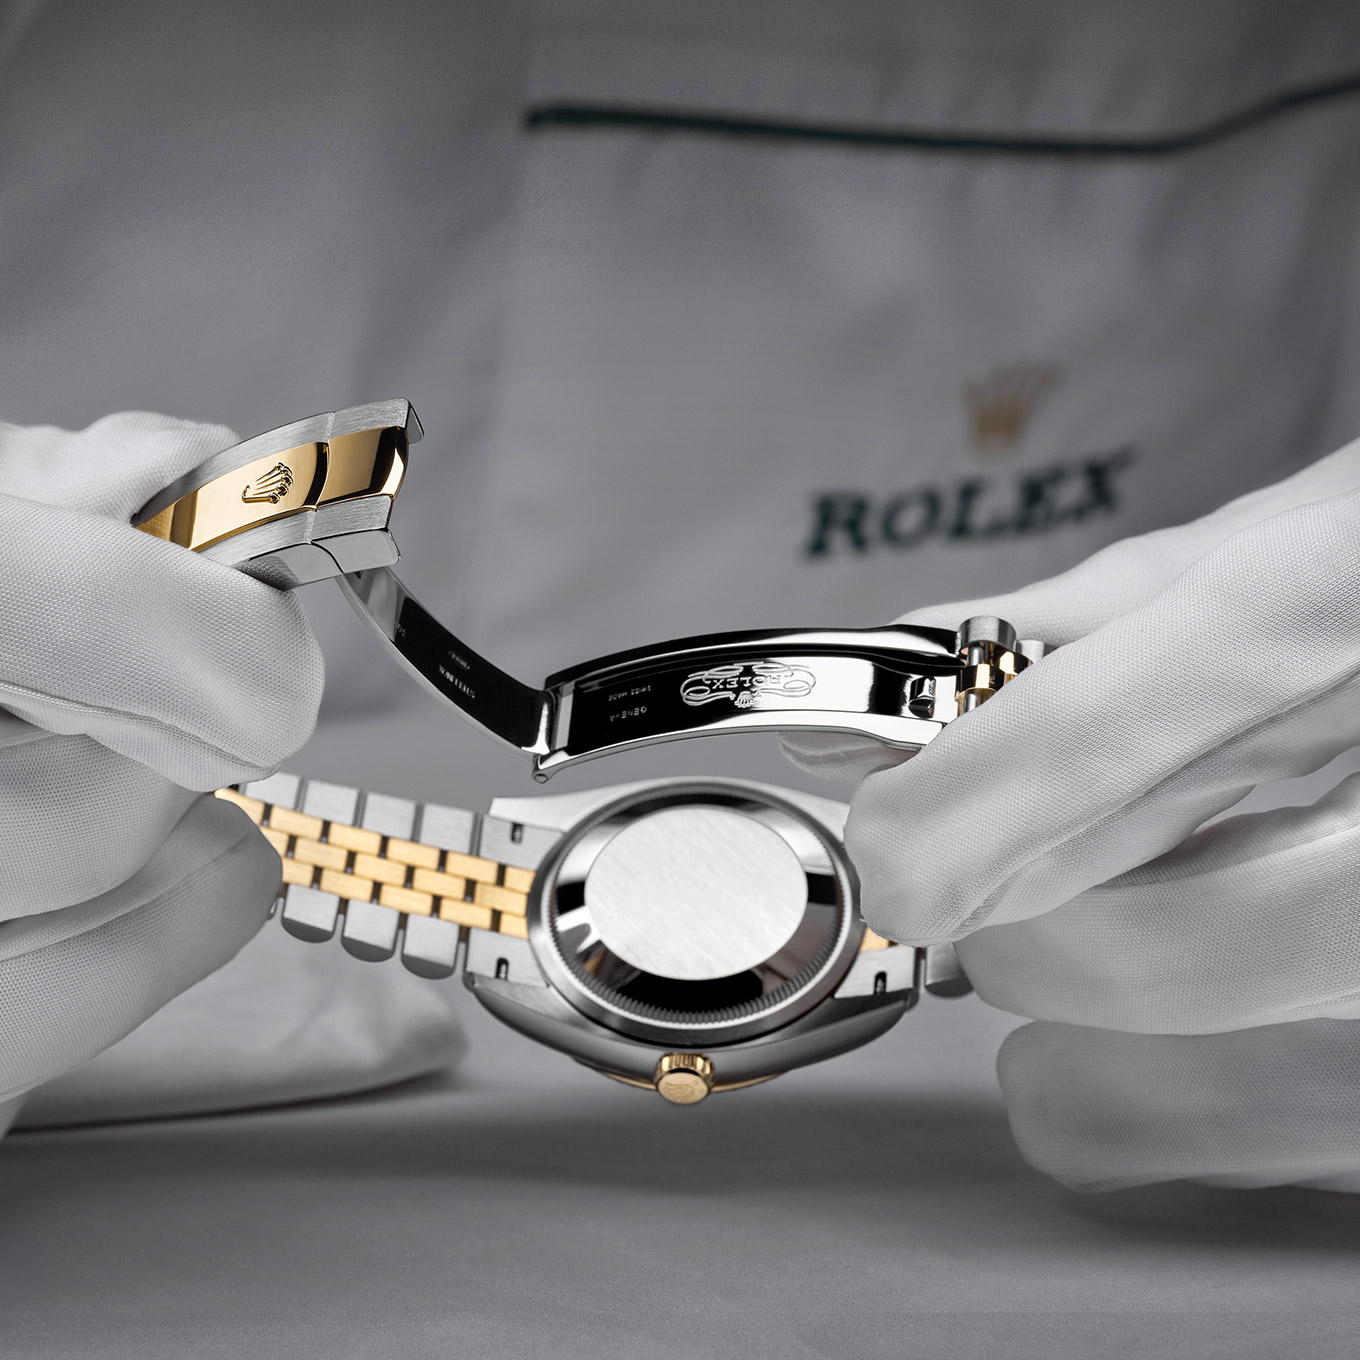 Rolex servicing at Thomas Markle Jewelers in Houston, TX